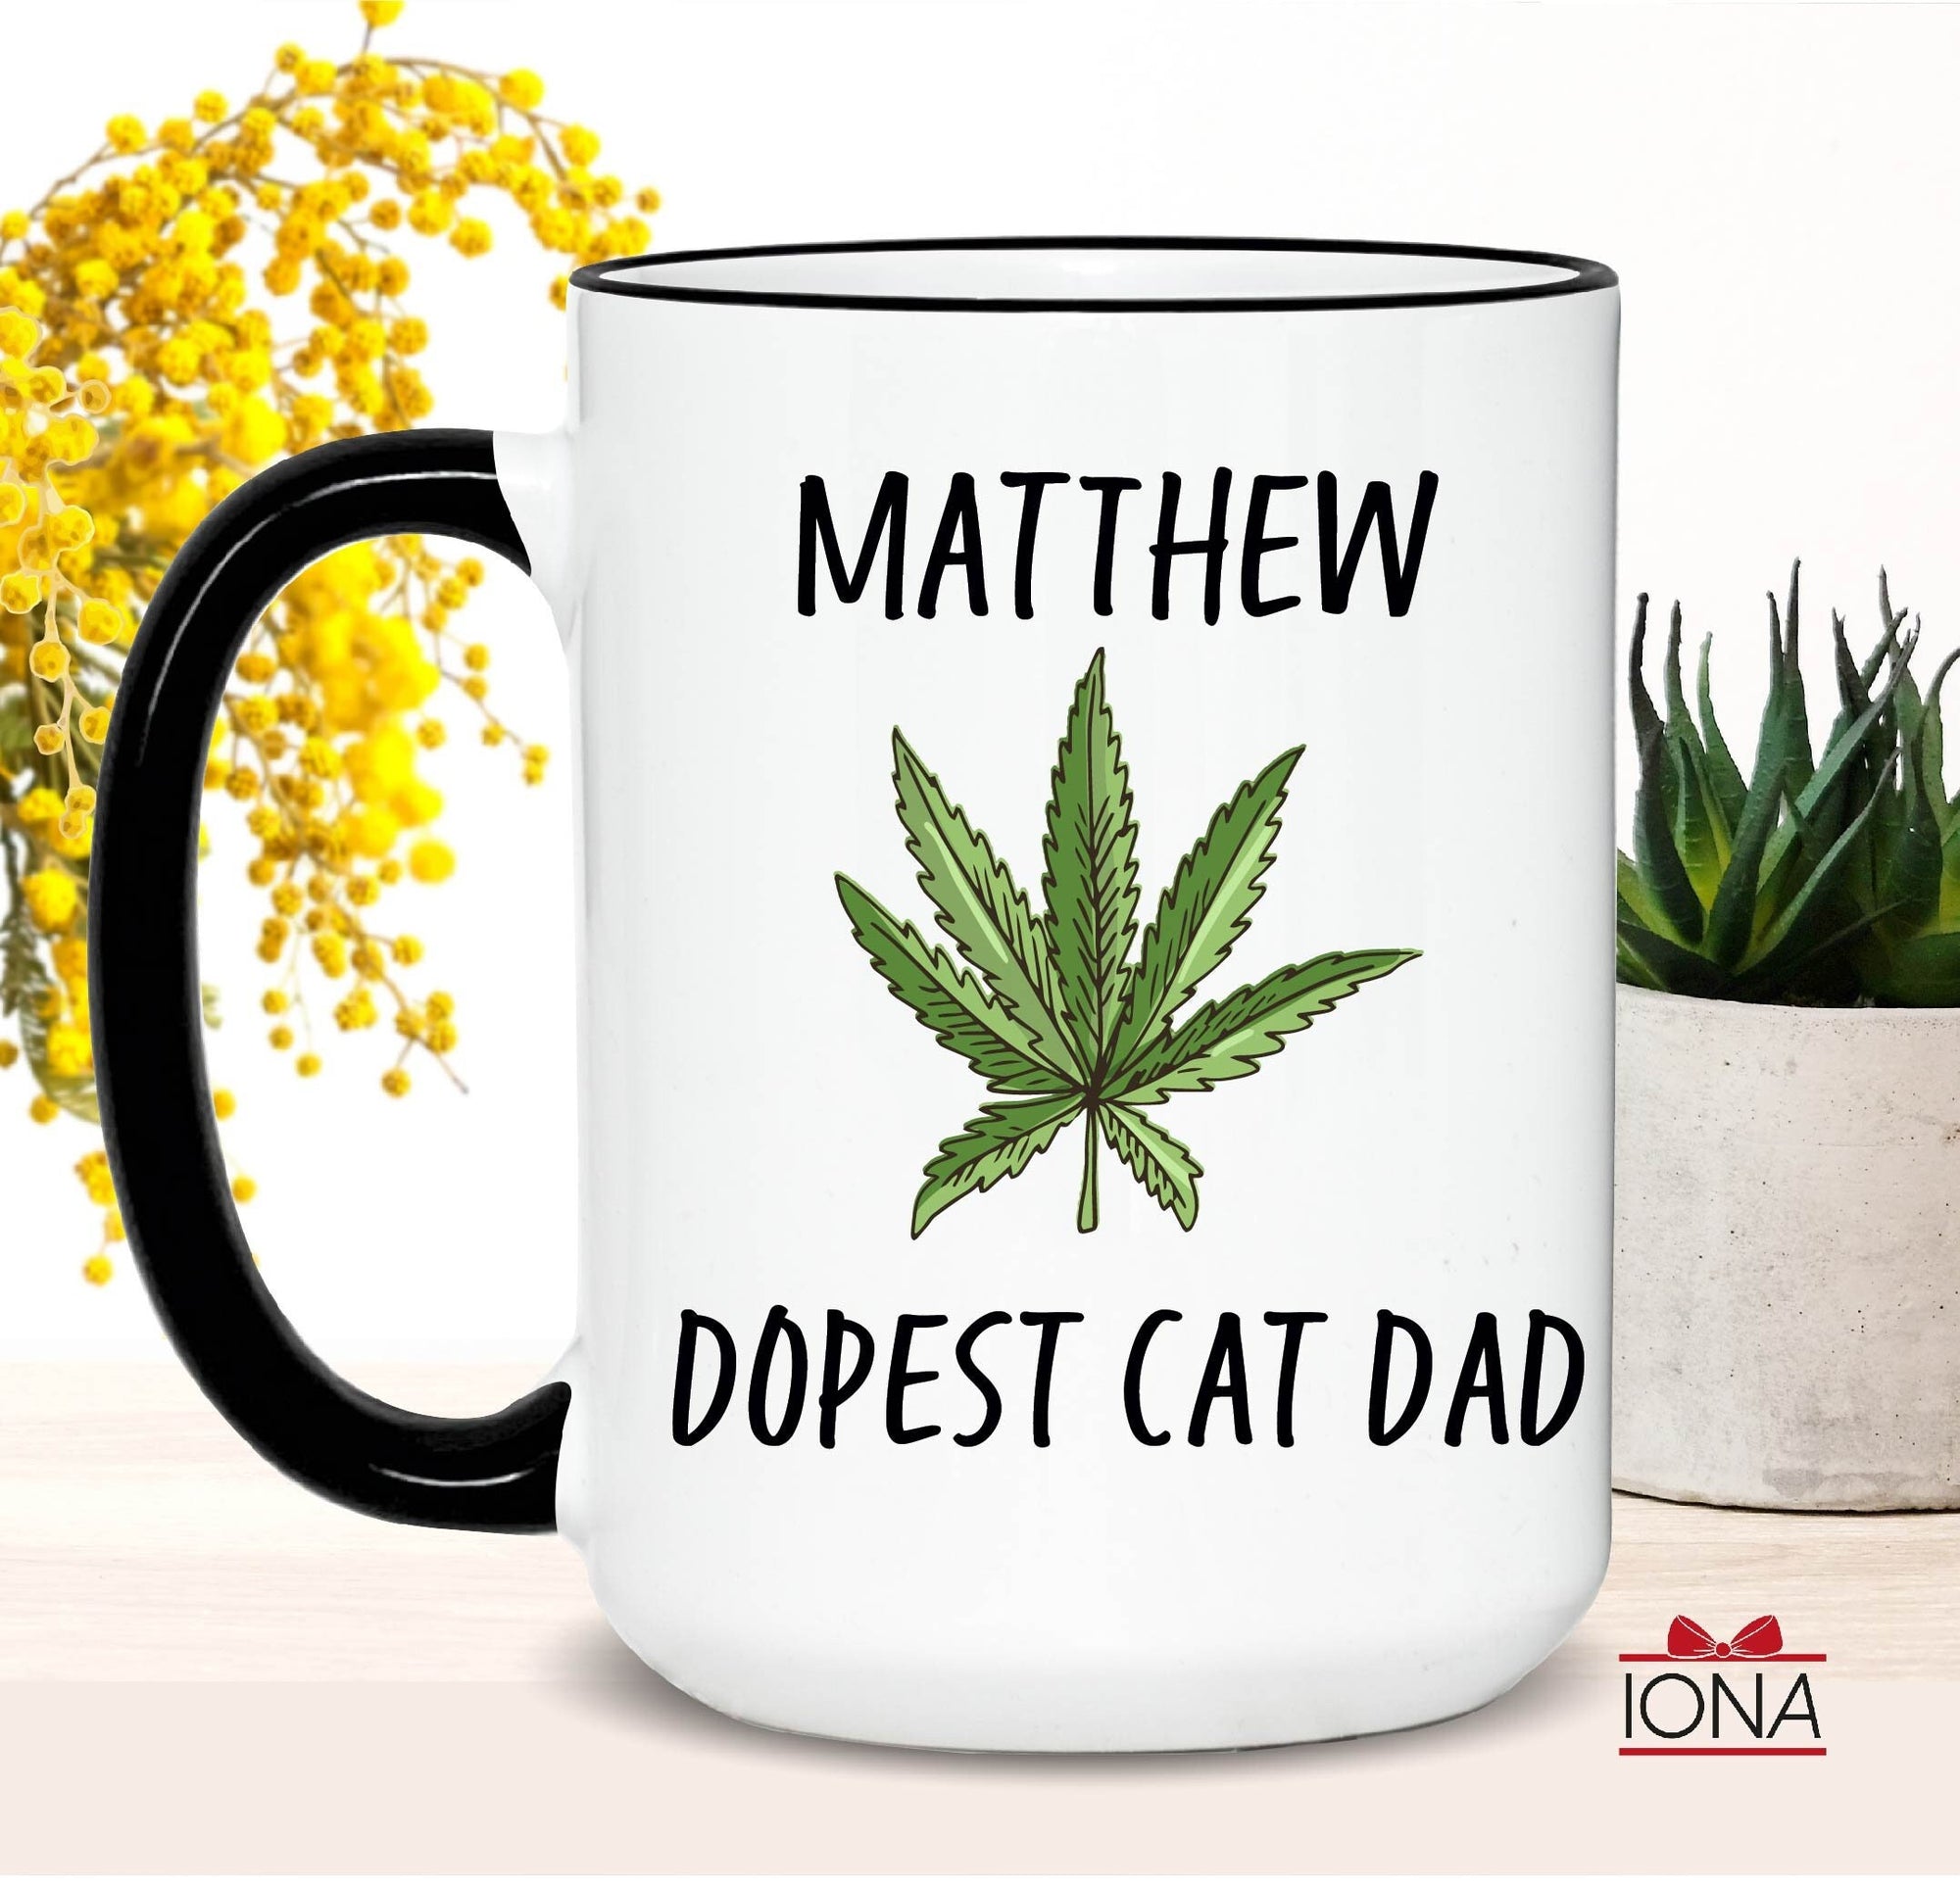 Dopest Cat Dad Coffee Mug, Personalized Cat Dad Birthday Gift, Funny Birthday Gift for Cat Dad , Cat Dad Tea Cup, Best Fucking Cat Dad Ever